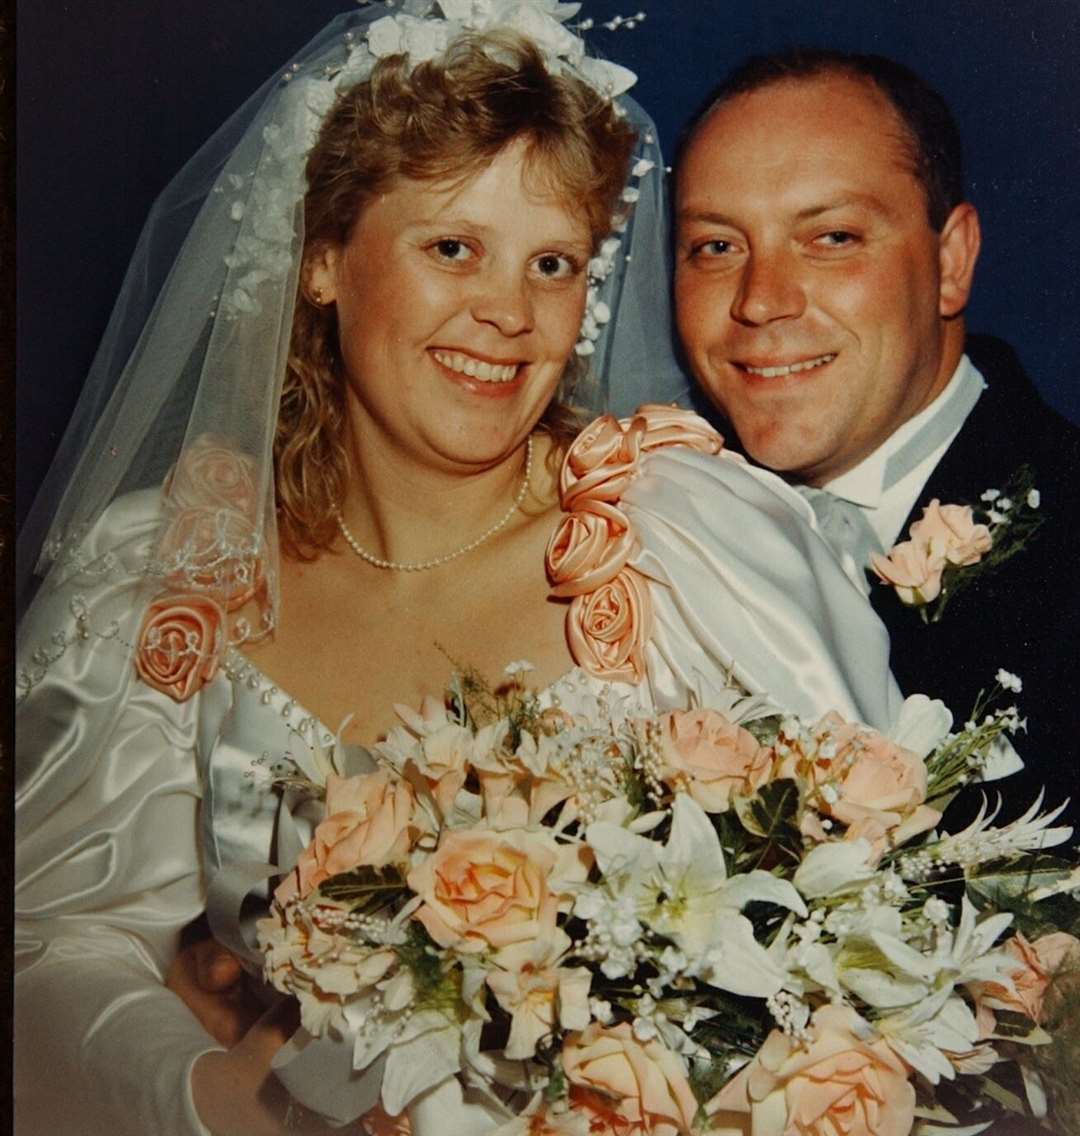 Debbie and Andrew Griggs on their wedding day in September 1990